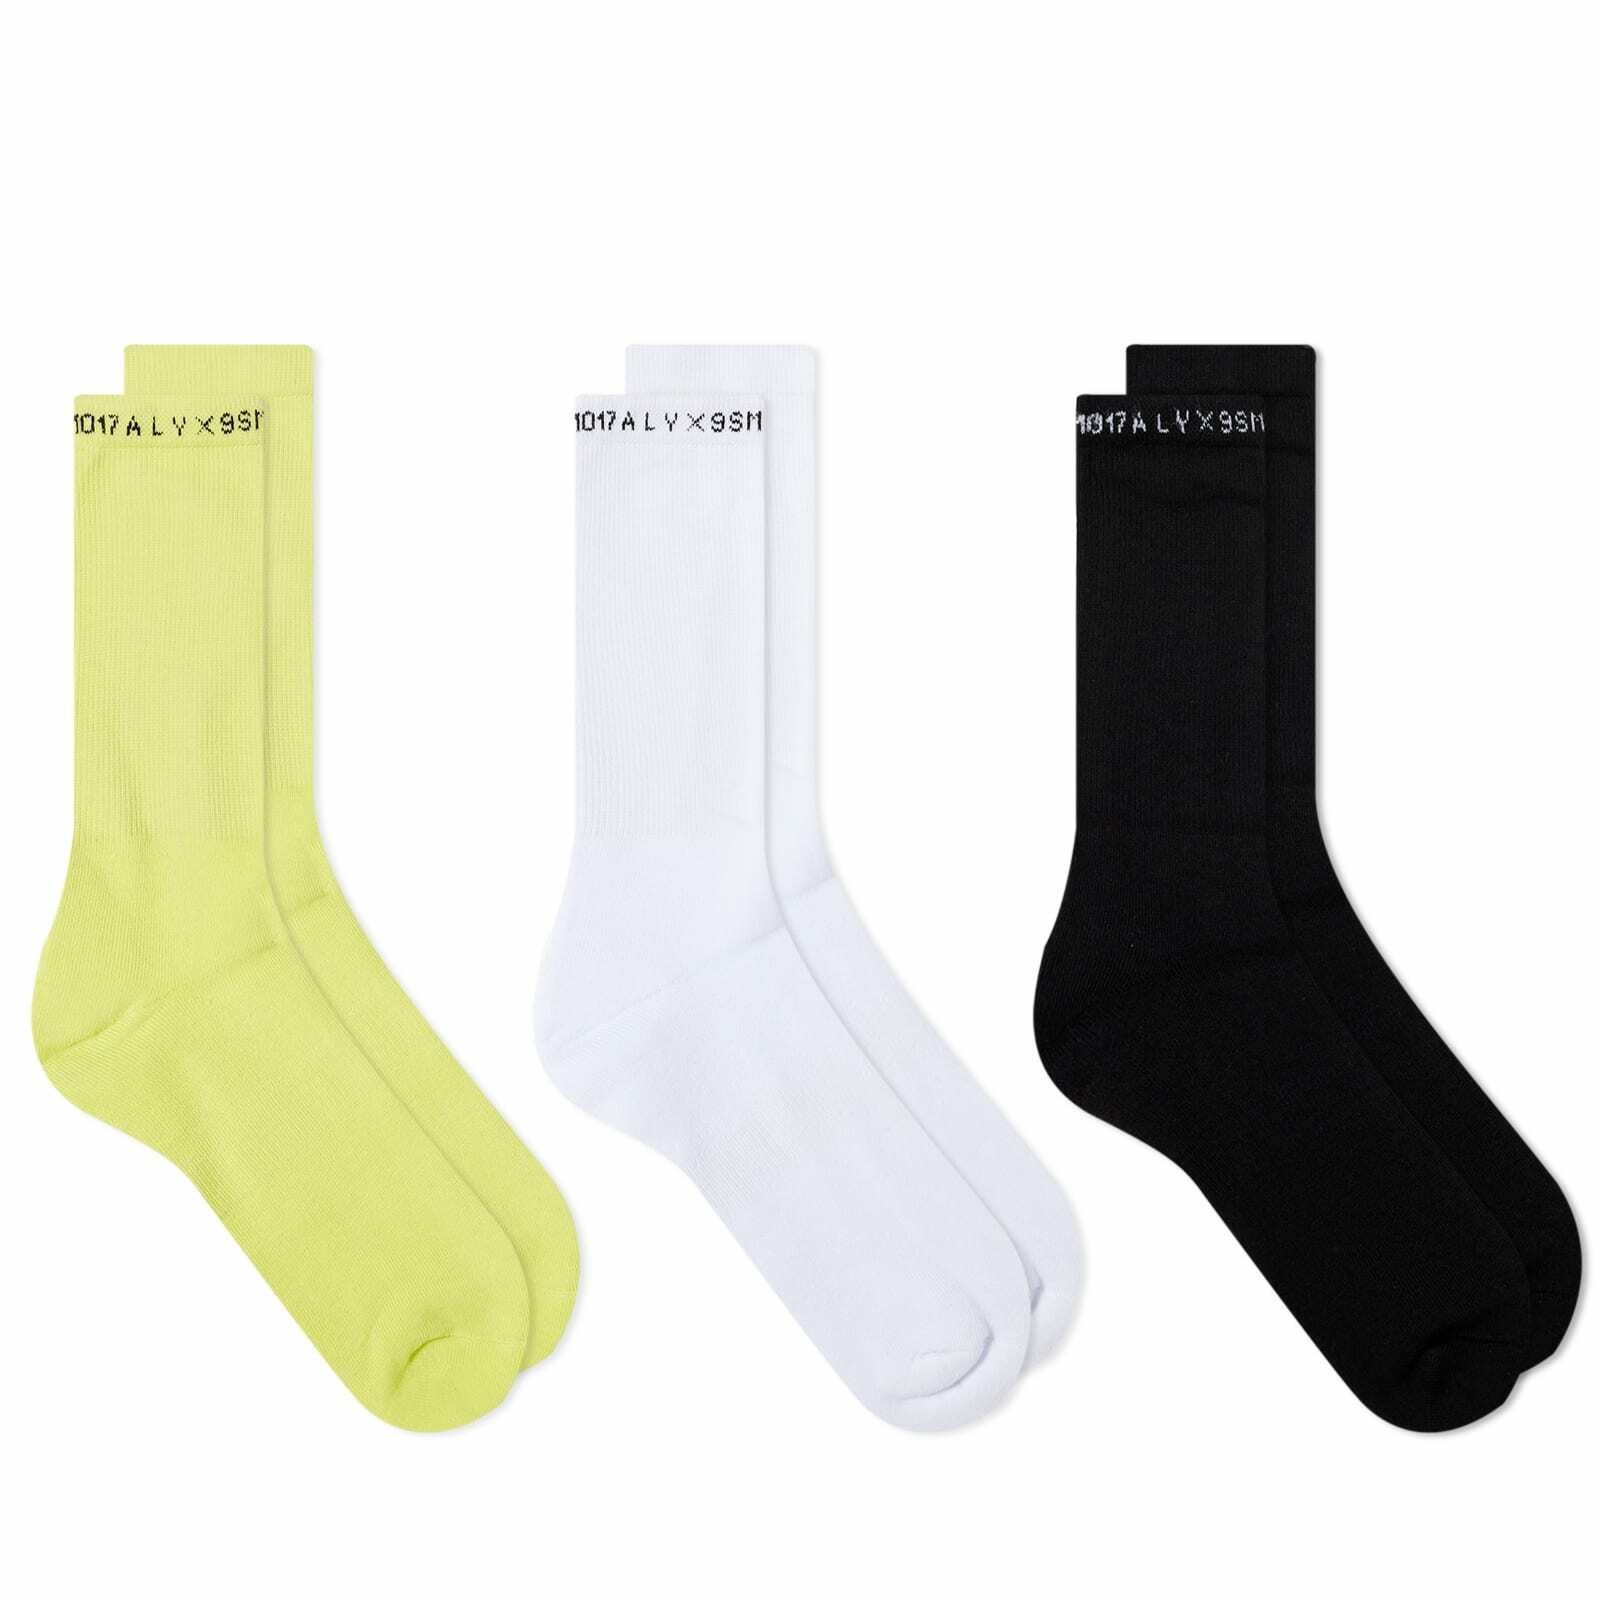 1017 ALYX 9SM Women's 3 Pack Socks in Black/White/Neon Washed Yellow ...